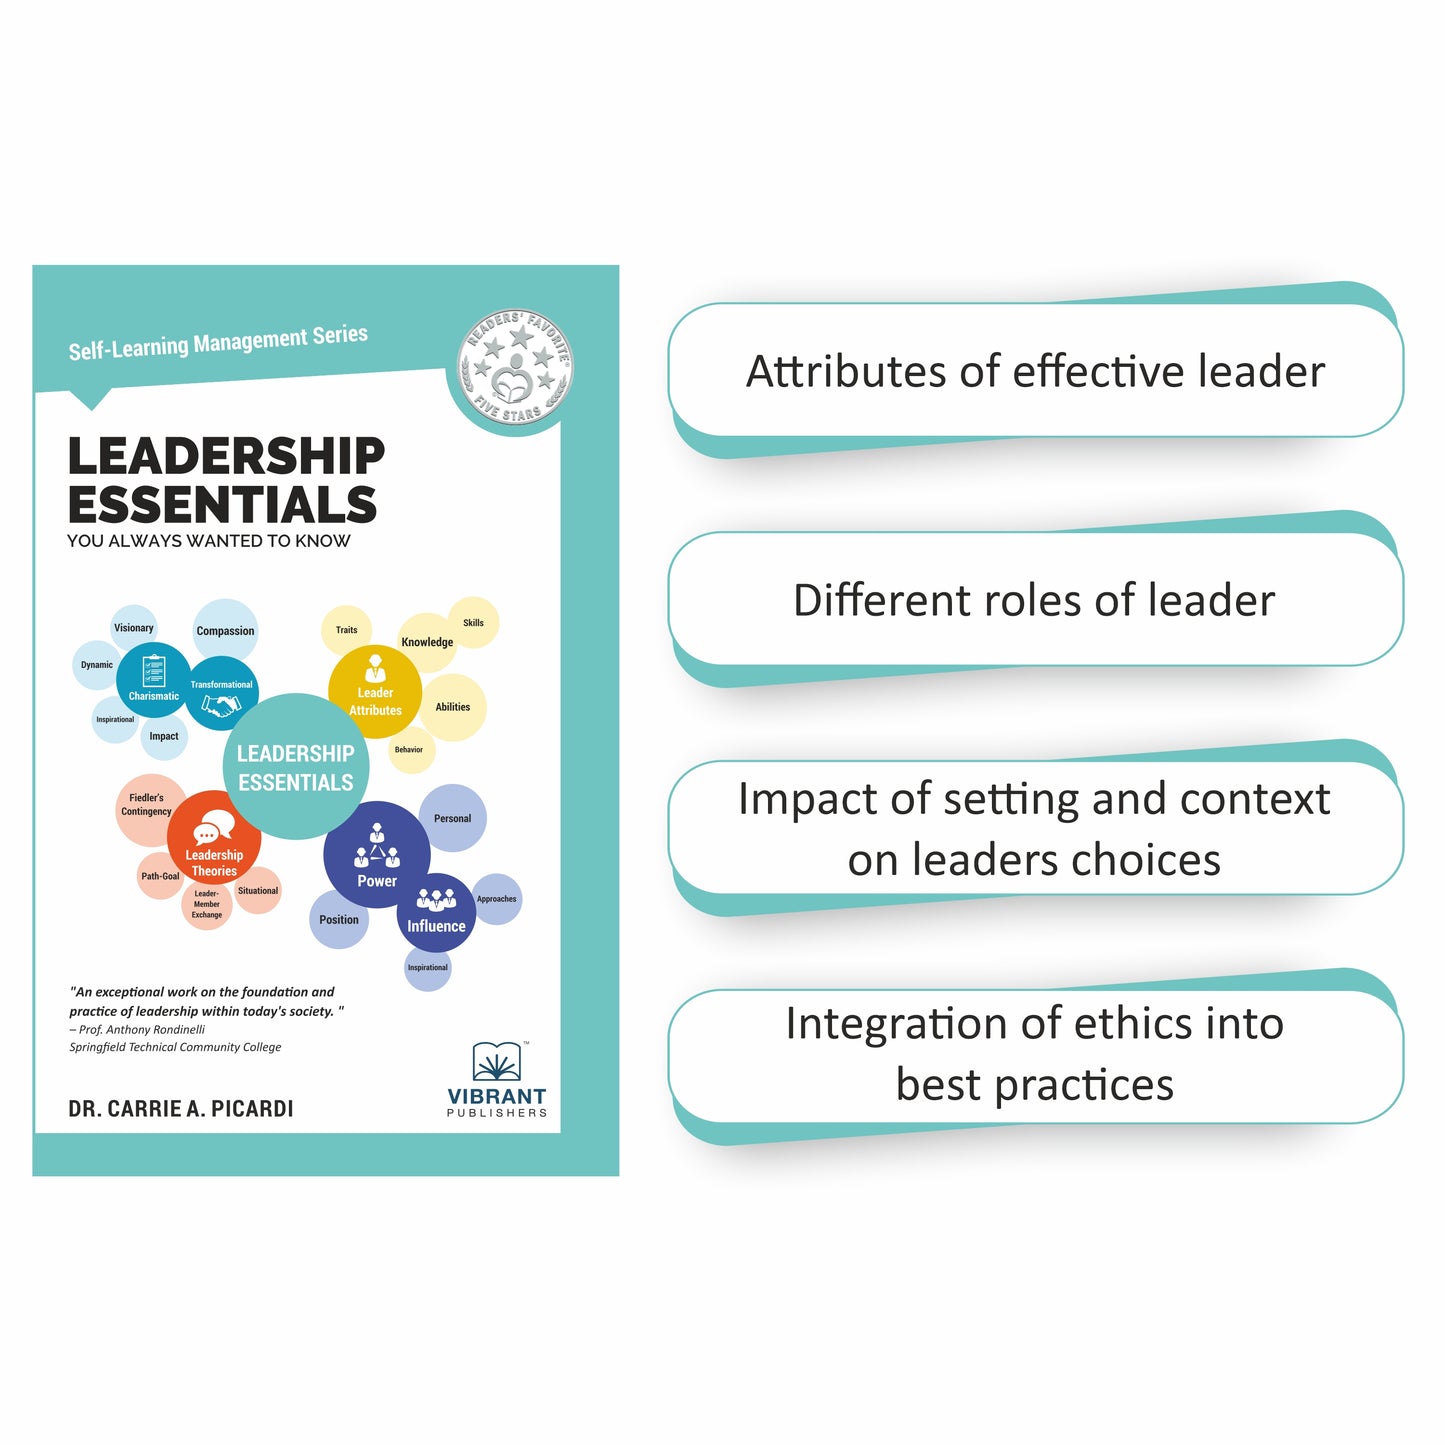 Management Essentials for New Managers, Team Leaders & Decision Makers of the 21st century – Hone your Decision Making and Leadership Skills, Create Seamless Digital Marketing and Business Strategies